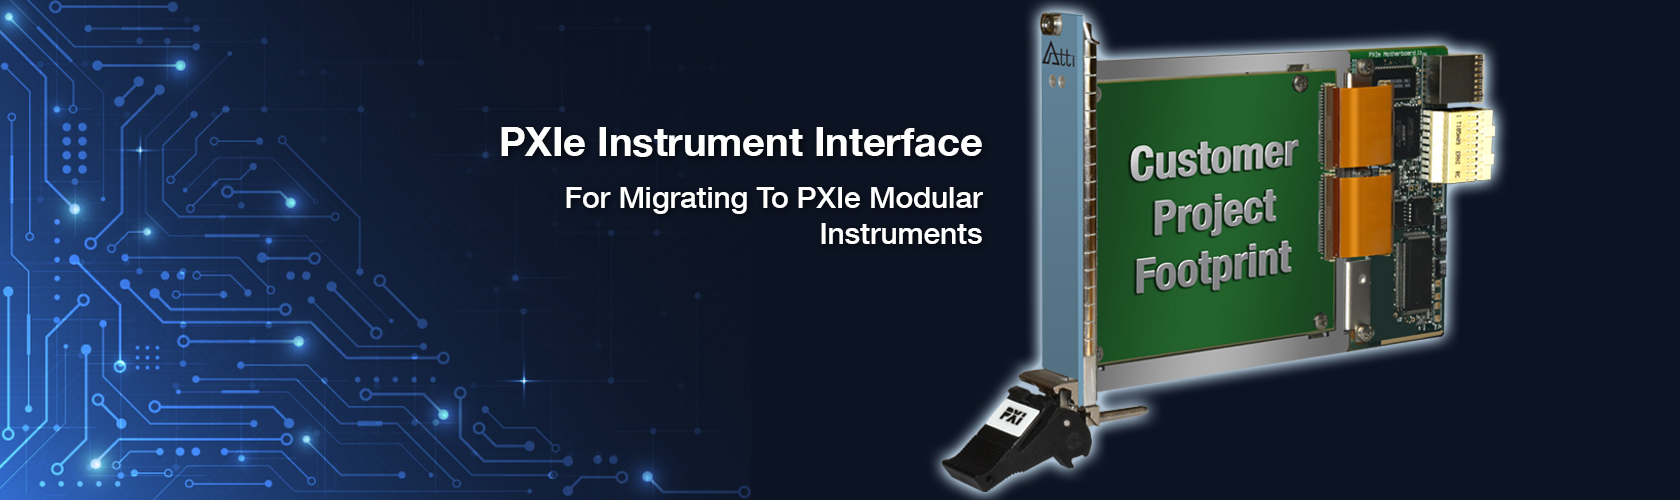 PXIe Instrument Interface